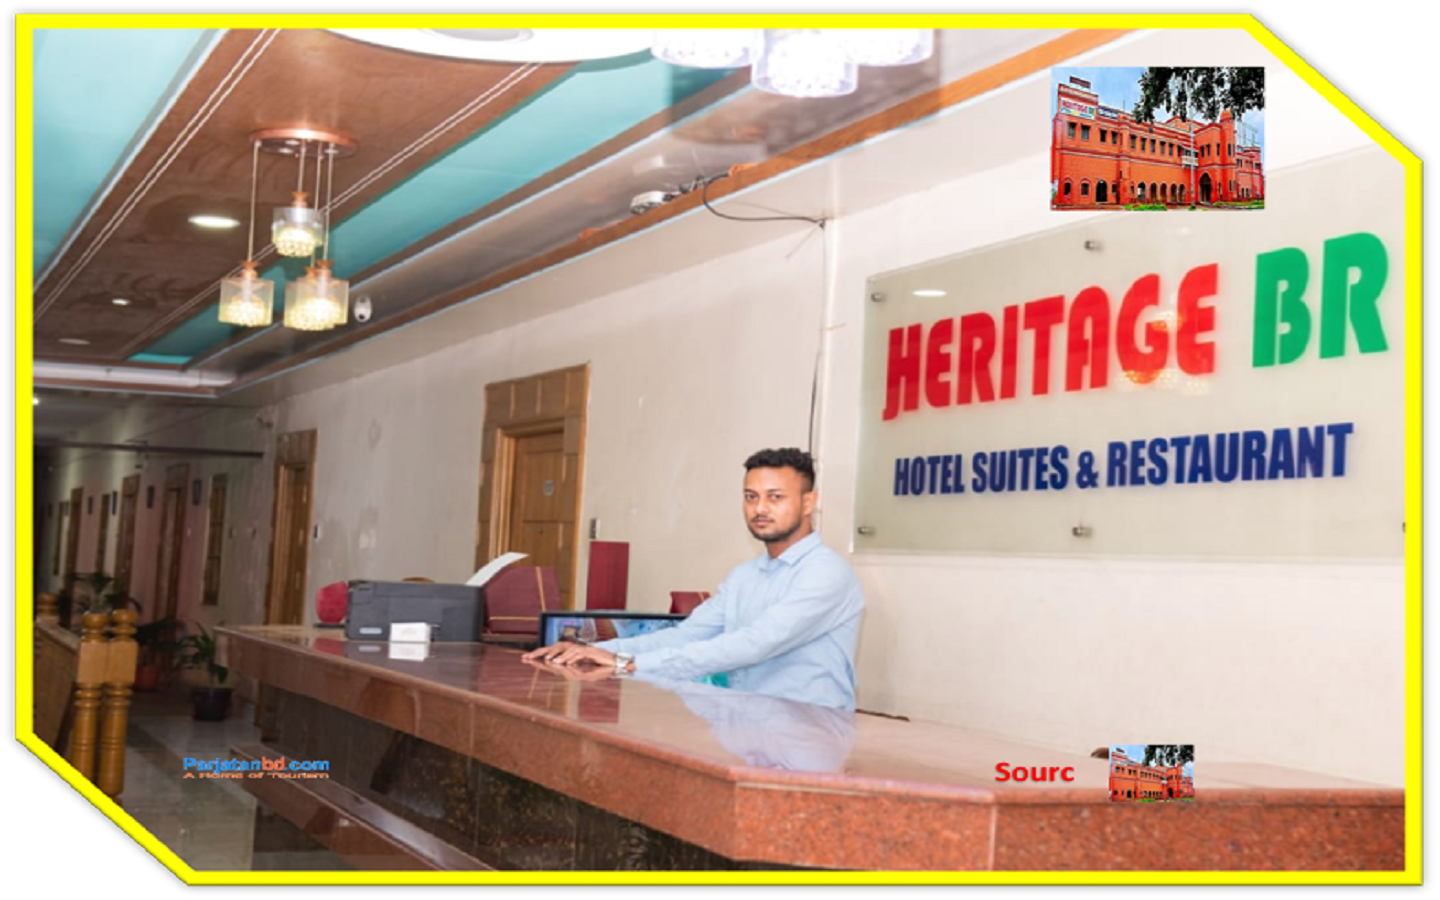 Heritage B.R. Hotel Suites and Restaurant Picture-2